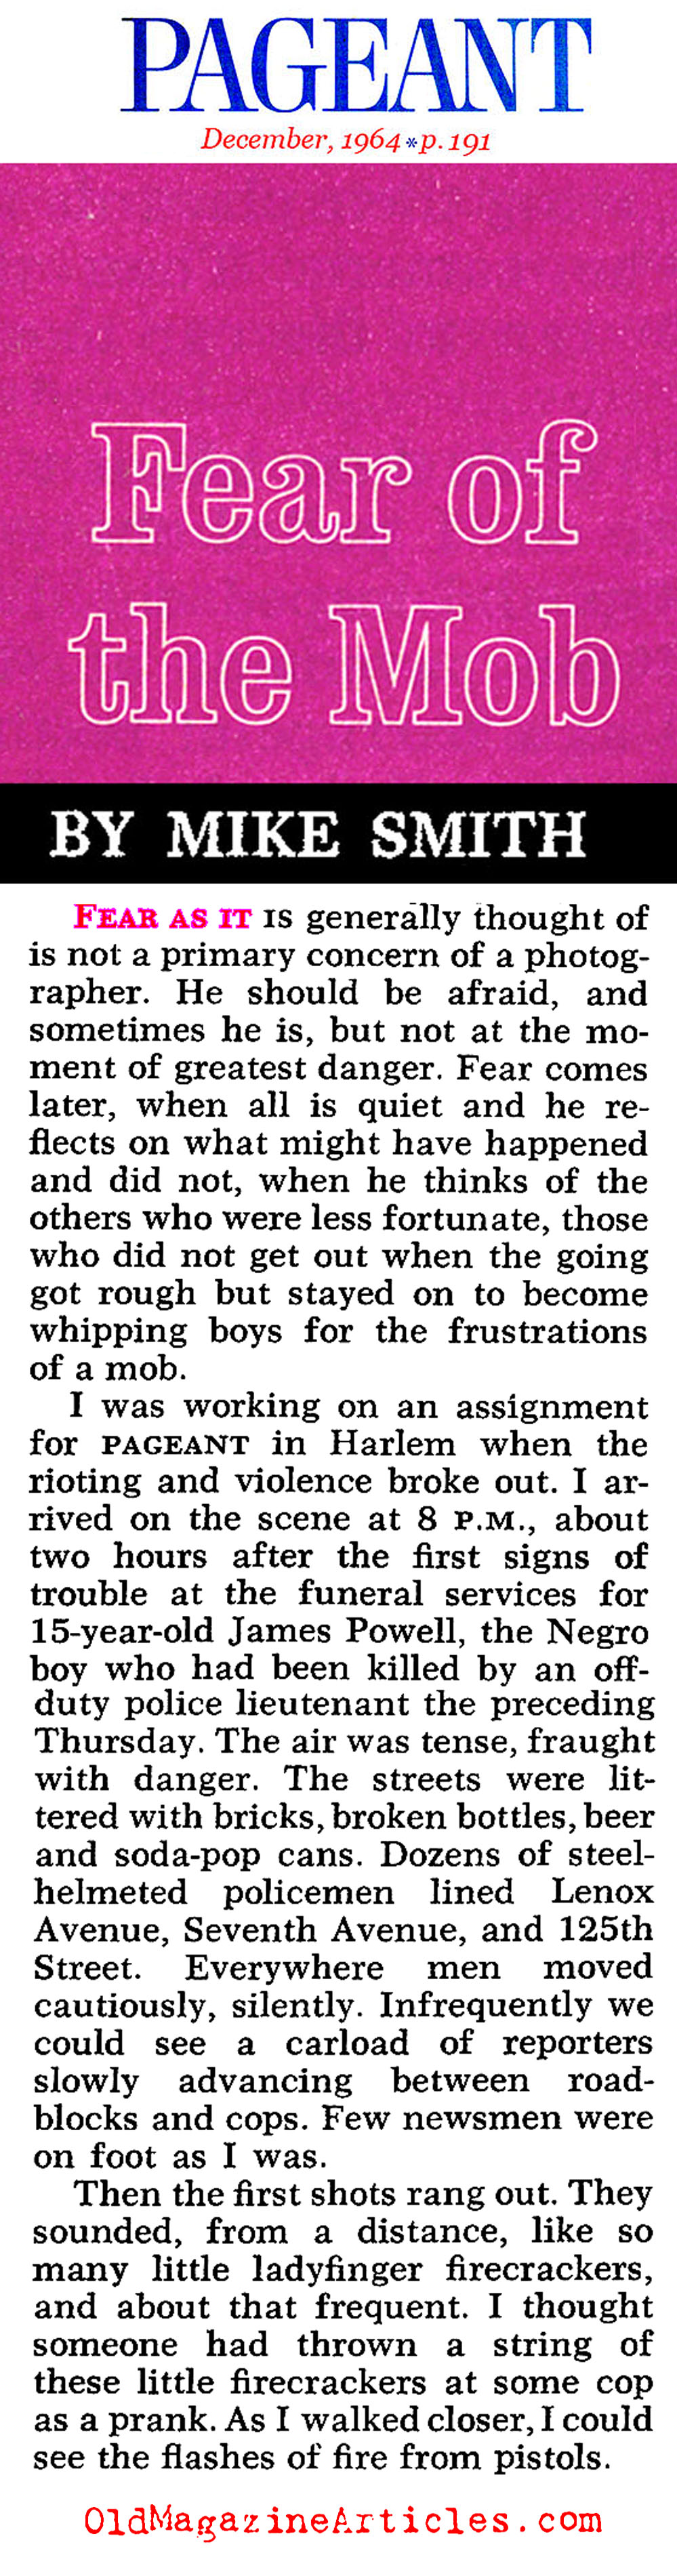 The 1964 Harlem Race Riot (Pageant Magazine, 1964)